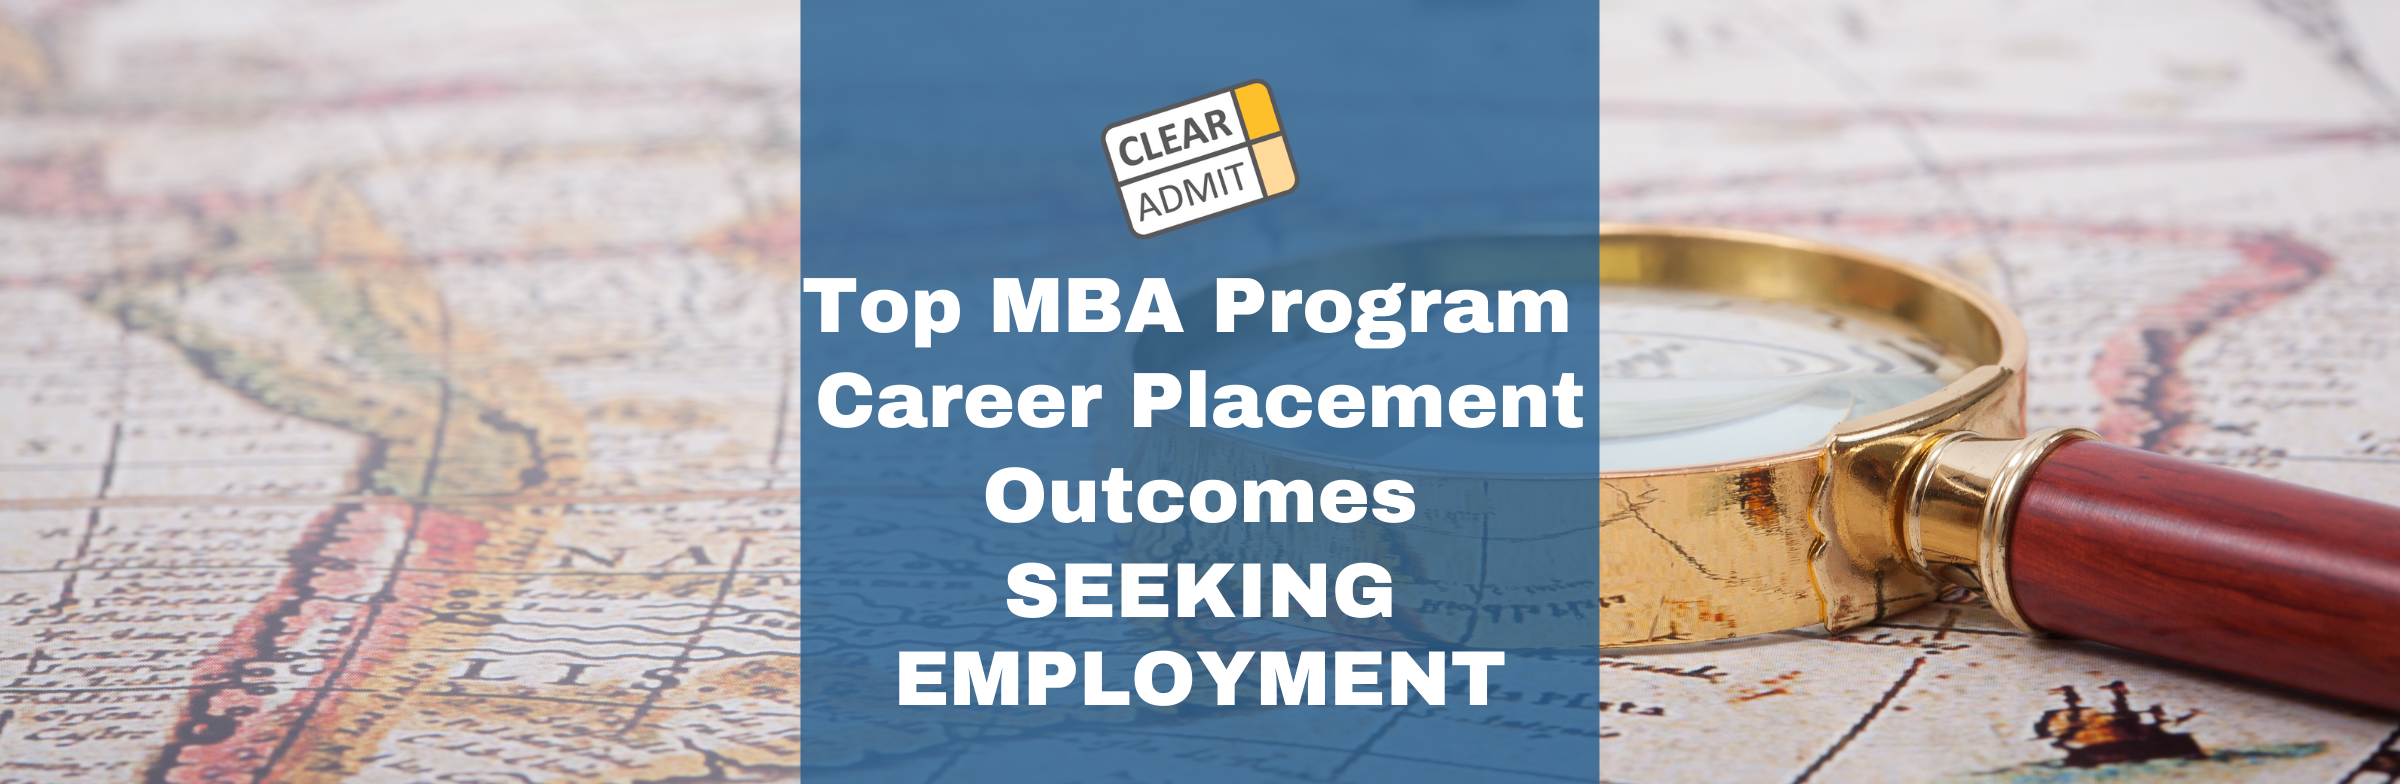 Image for Top MBA Program Career Placement Outcomes: Graduates Seeking Employment